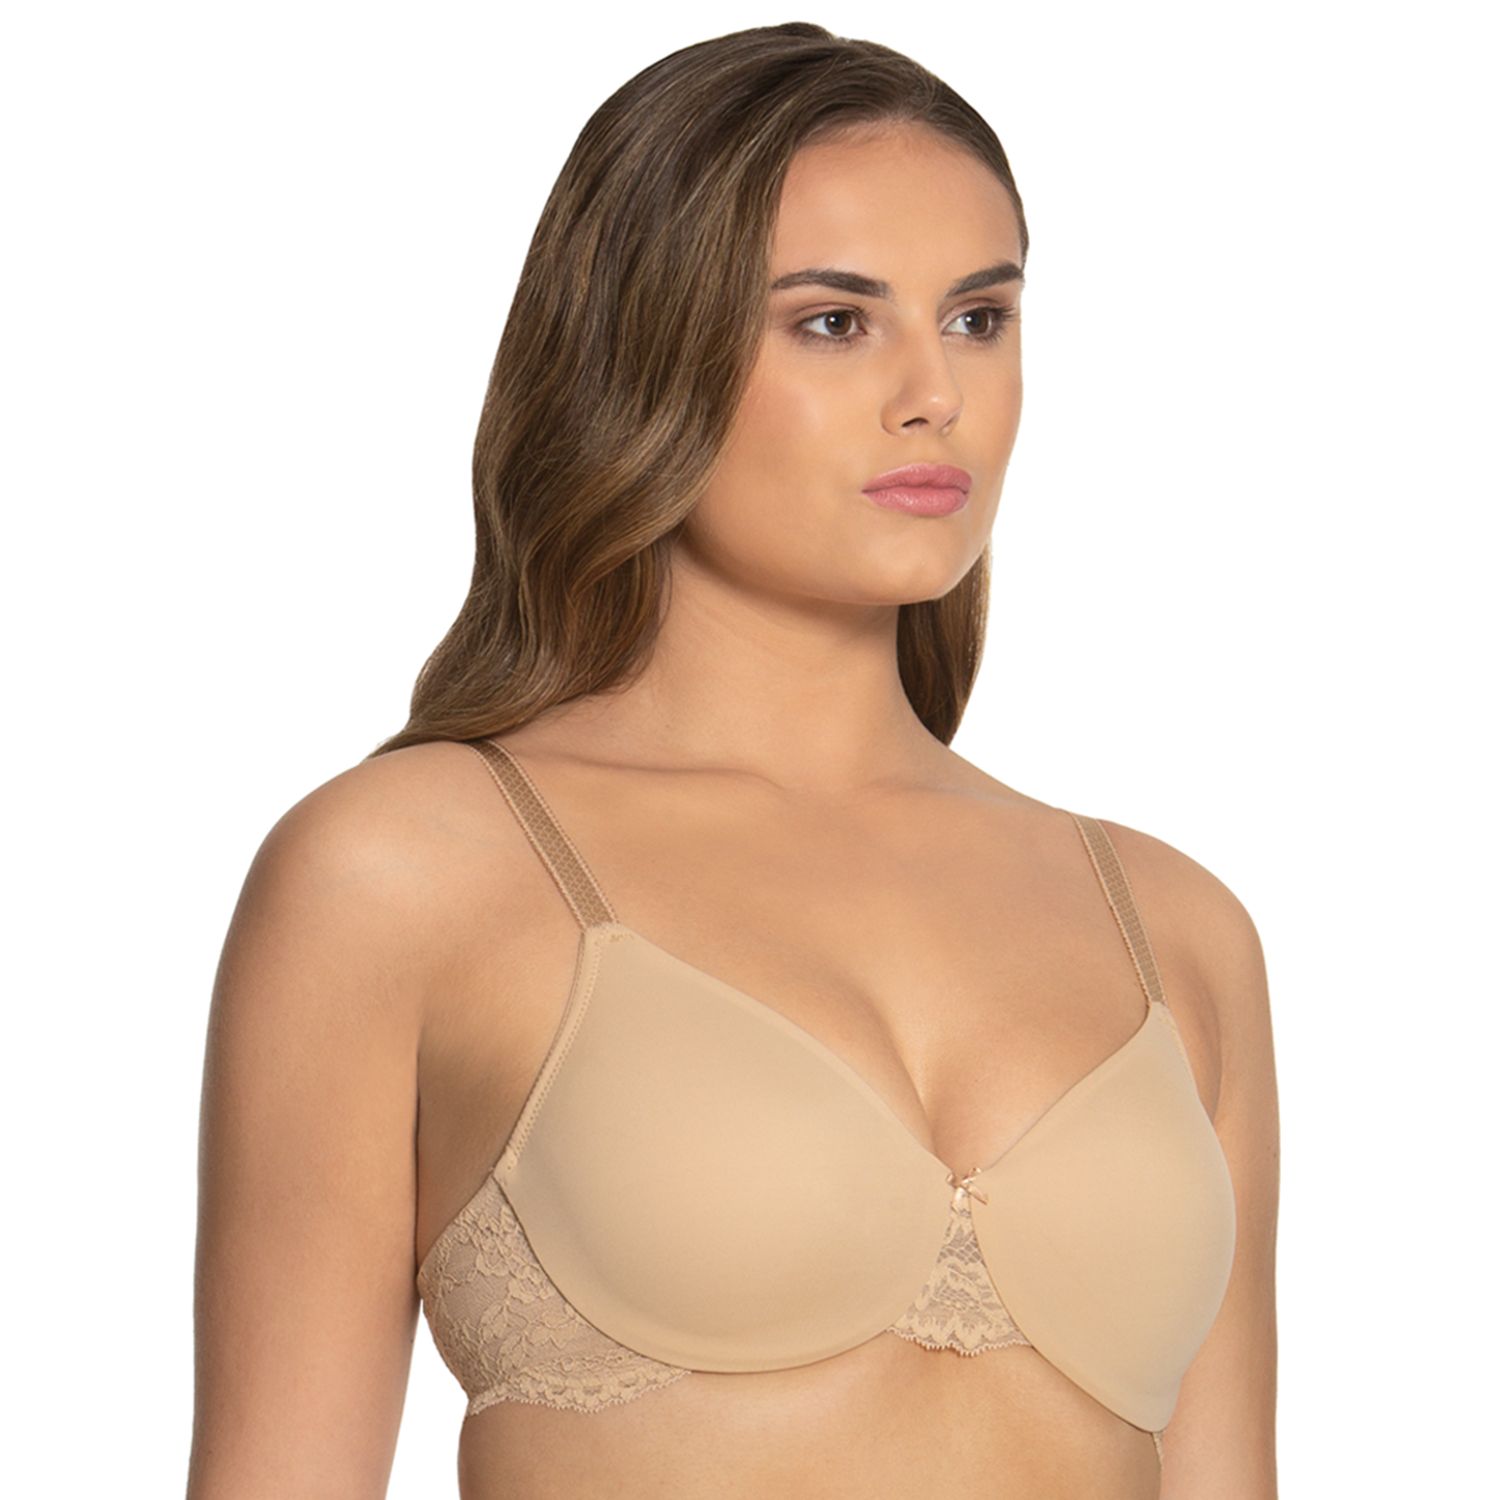 Image for Dominique Lena Soft and Sexy Lace Minimizer Back Smoothing Bra 7309 at Kohl's.